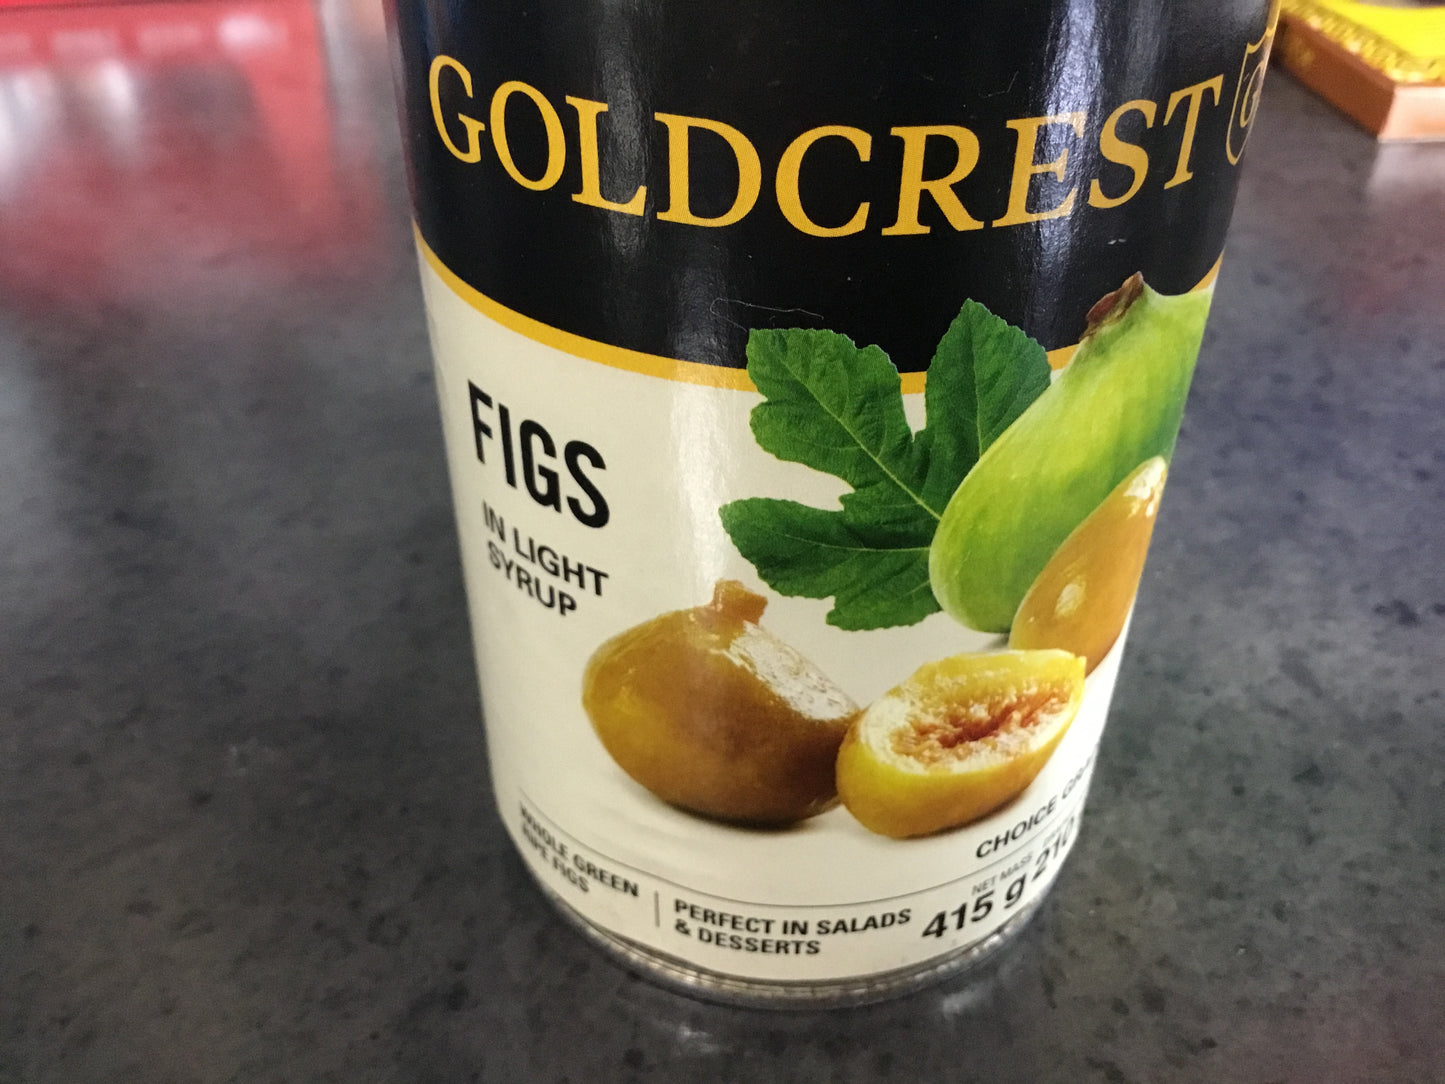 Goldcrest Figs in Syrup 415g Tin